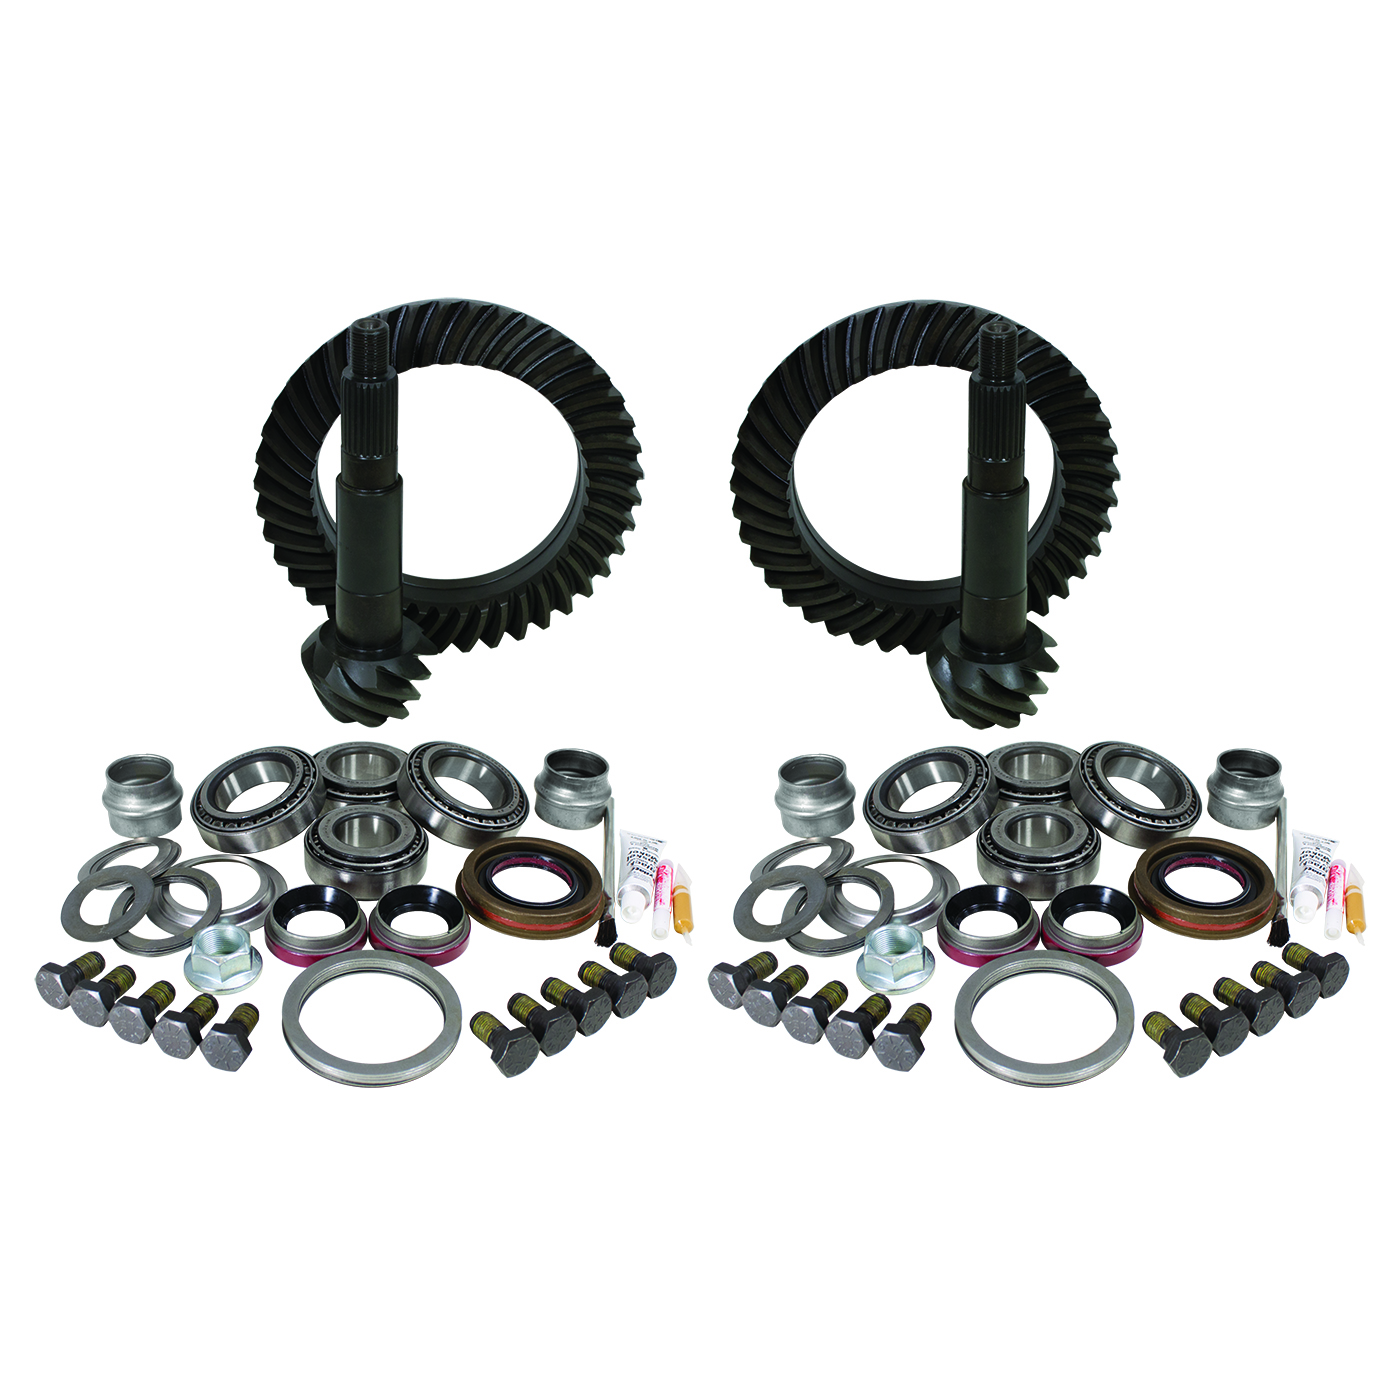 Yukon Gear & Install Kit package for Jeep JK Rubicon, 4.11 ratio. 